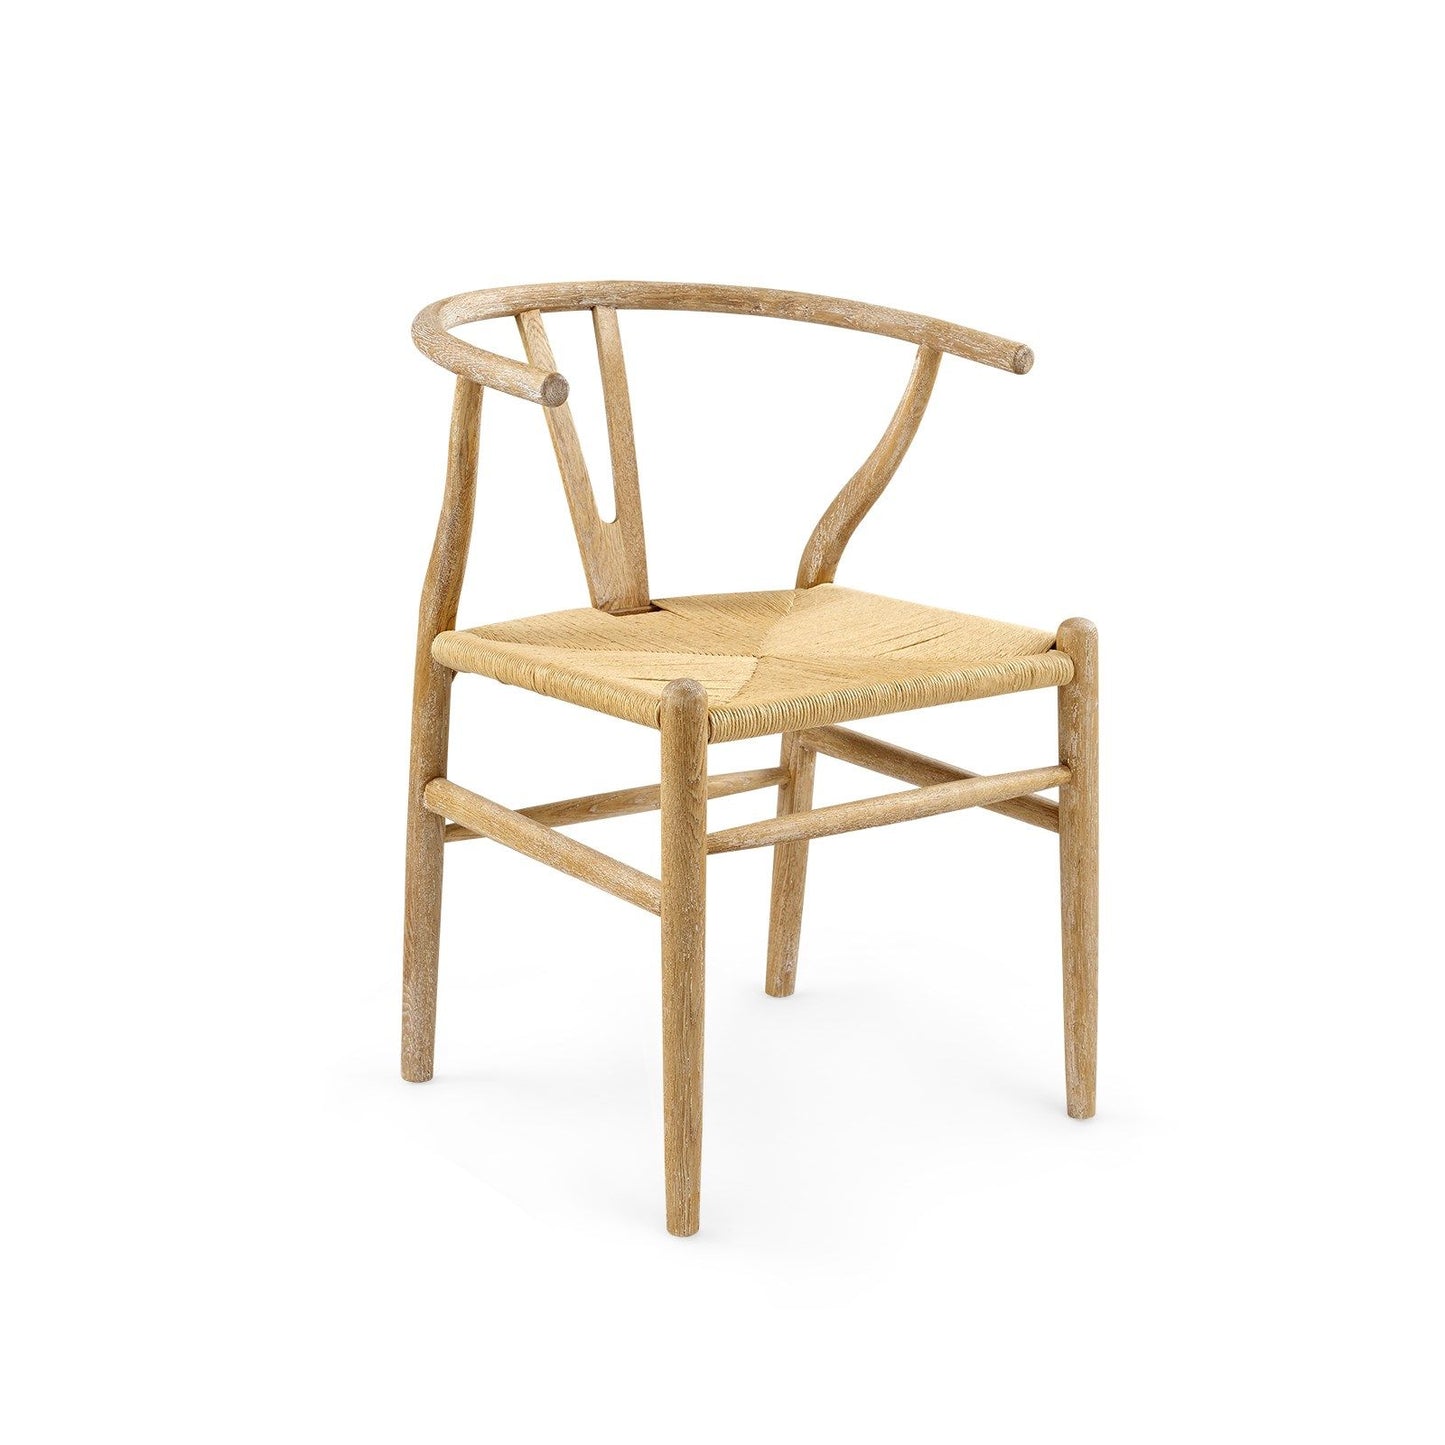 Load image into Gallery viewer, Oslo Armchair, Natural Dining Chair Bungalow 5     Four Hands, Burke Decor, Mid Century Modern Furniture, Old Bones Furniture Company, Old Bones Co, Modern Mid Century, Designer Furniture, https://www.oldbonesco.com/
